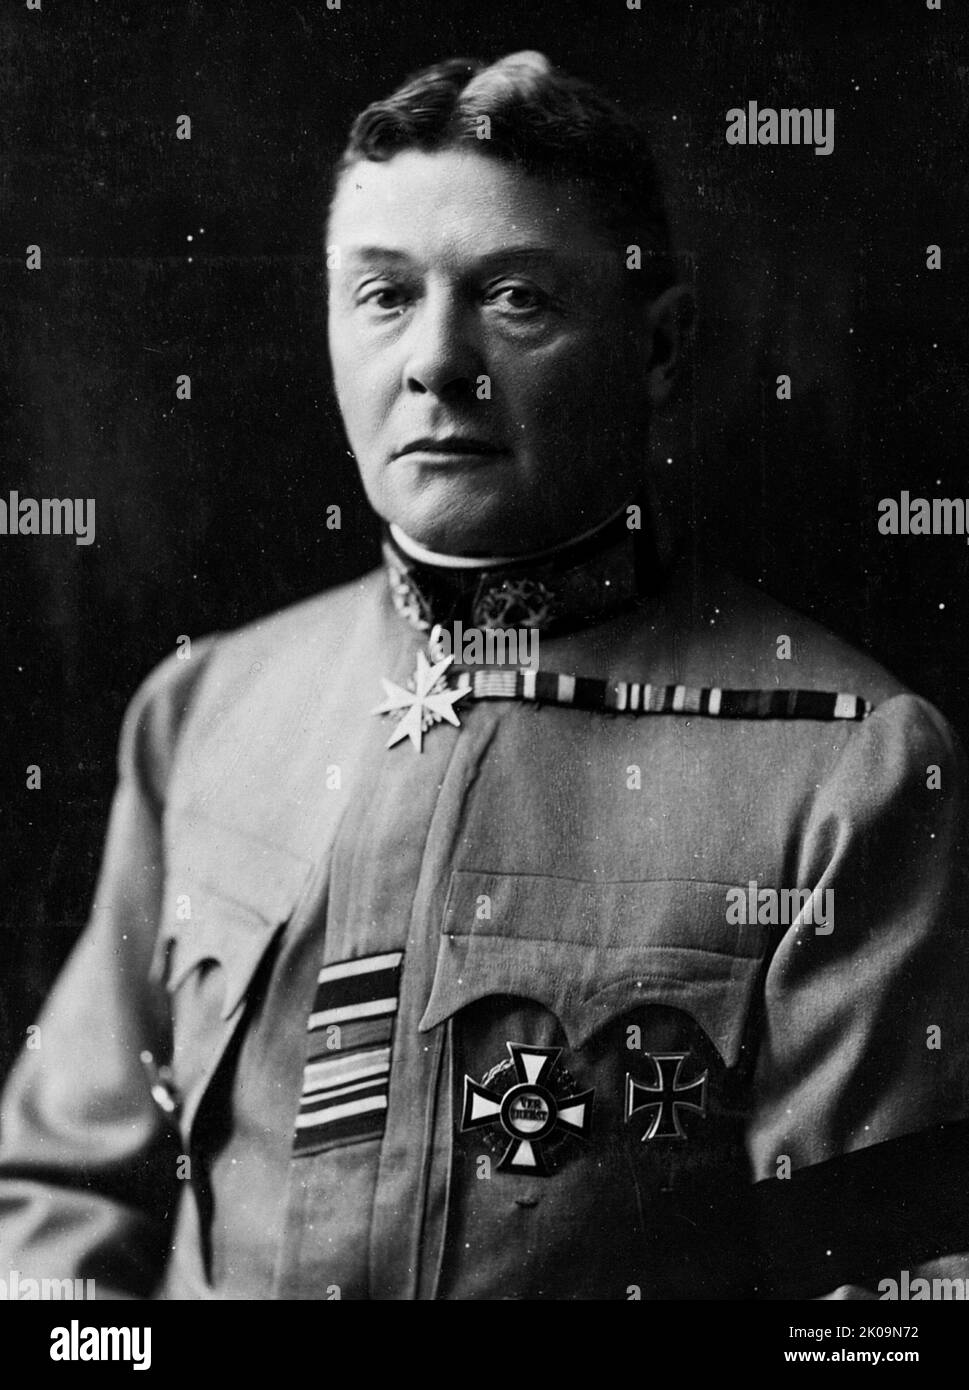 Hermann Kovess von Kovesshaza (1854 - 1924), Commander-in-Chief of the Austro-Hungarian Army. He served as a generally competent and unremarkable commander in the Austro-Hungarian Army and was close to retirement in 1914 when the First World War broke out and he was given a command post. Stock Photo